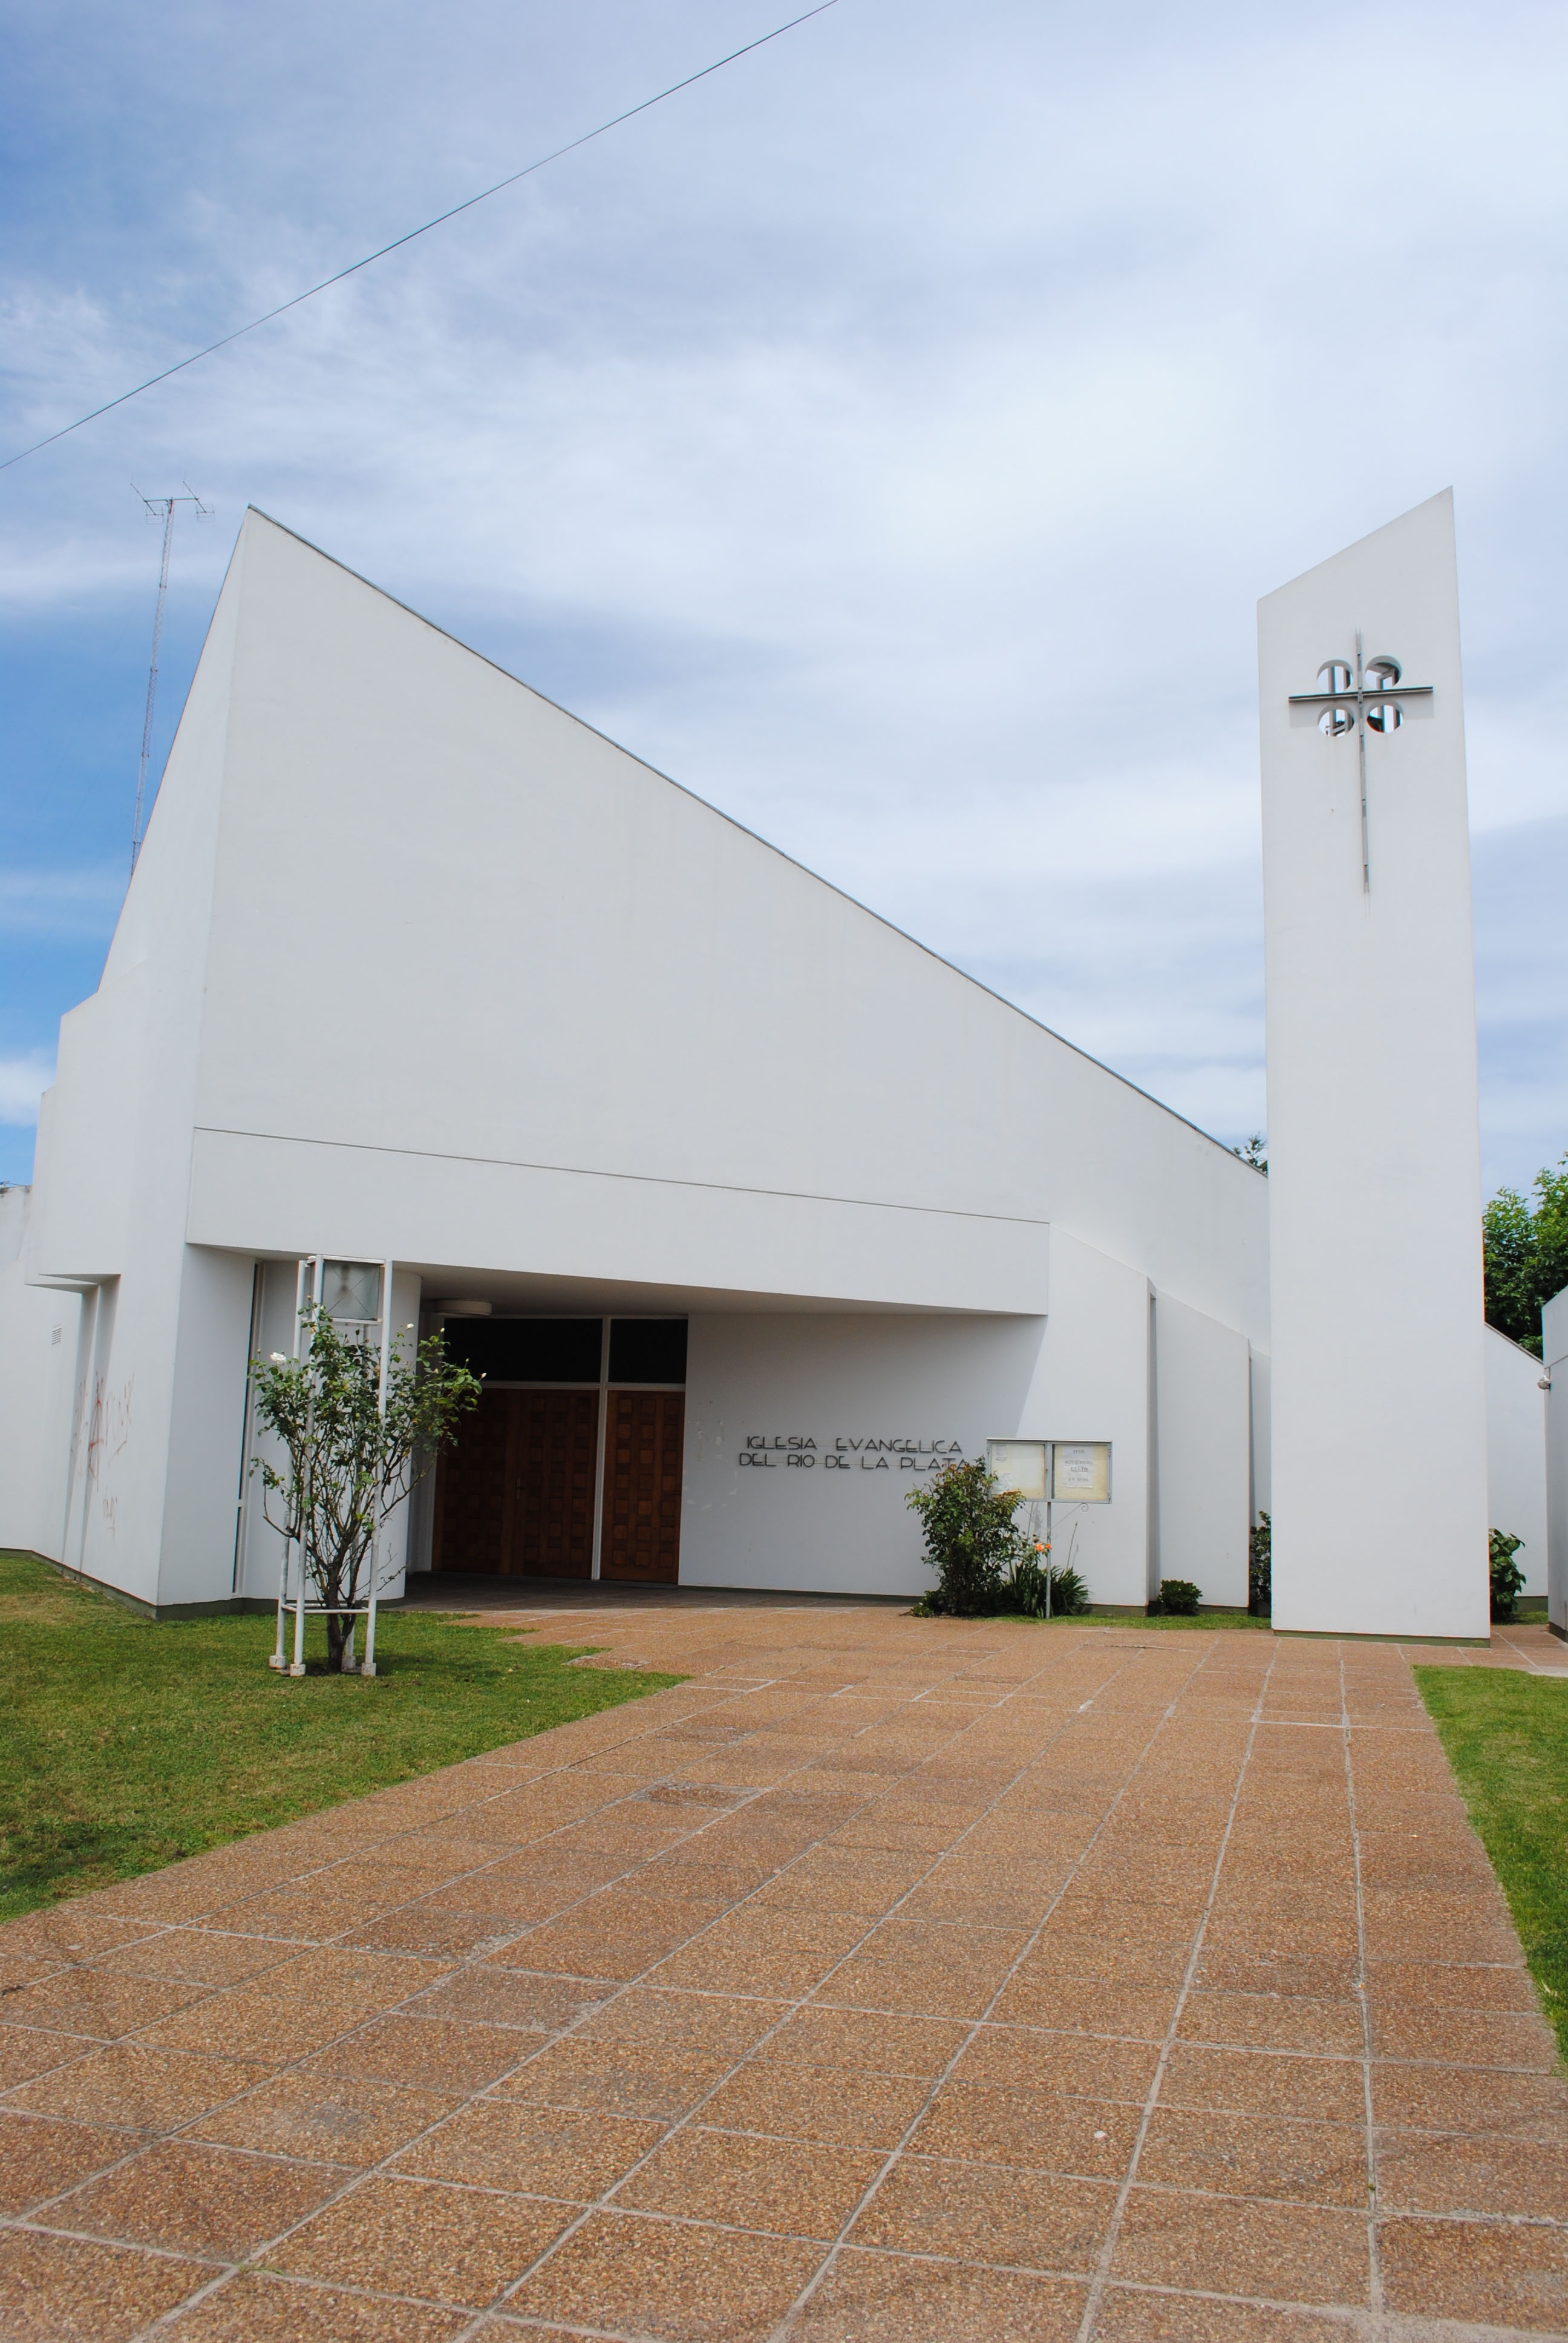 Lutheran Church (IERP) in Gualeguaychú (completed in 1989) Source: Leandro Hildt.